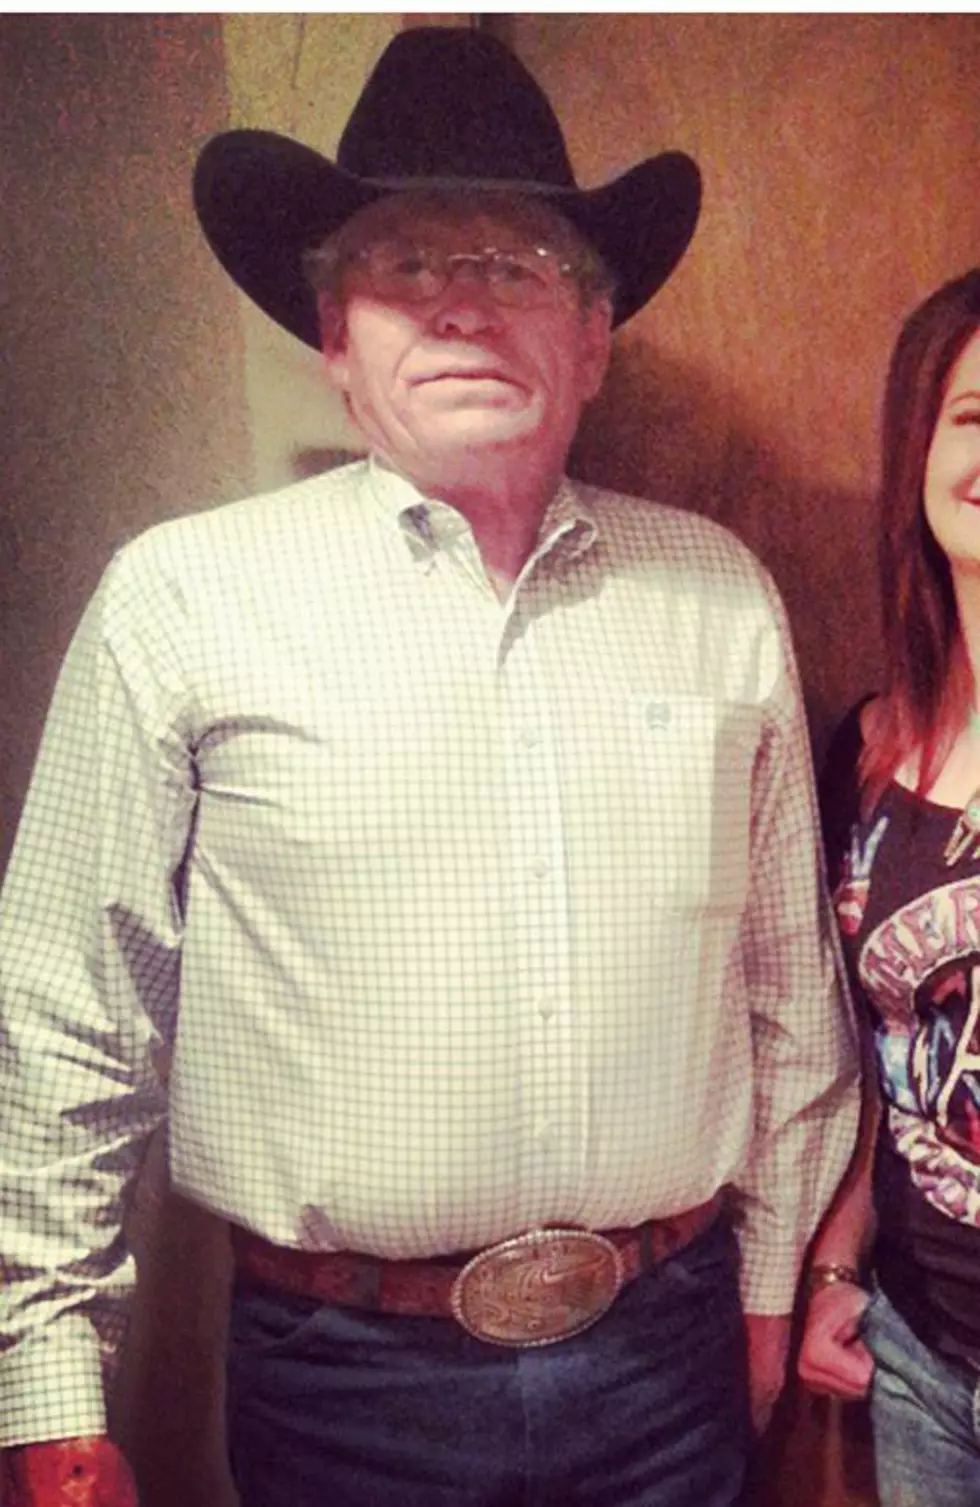 FBI Called In To Find Missing Dalhart Cowboy